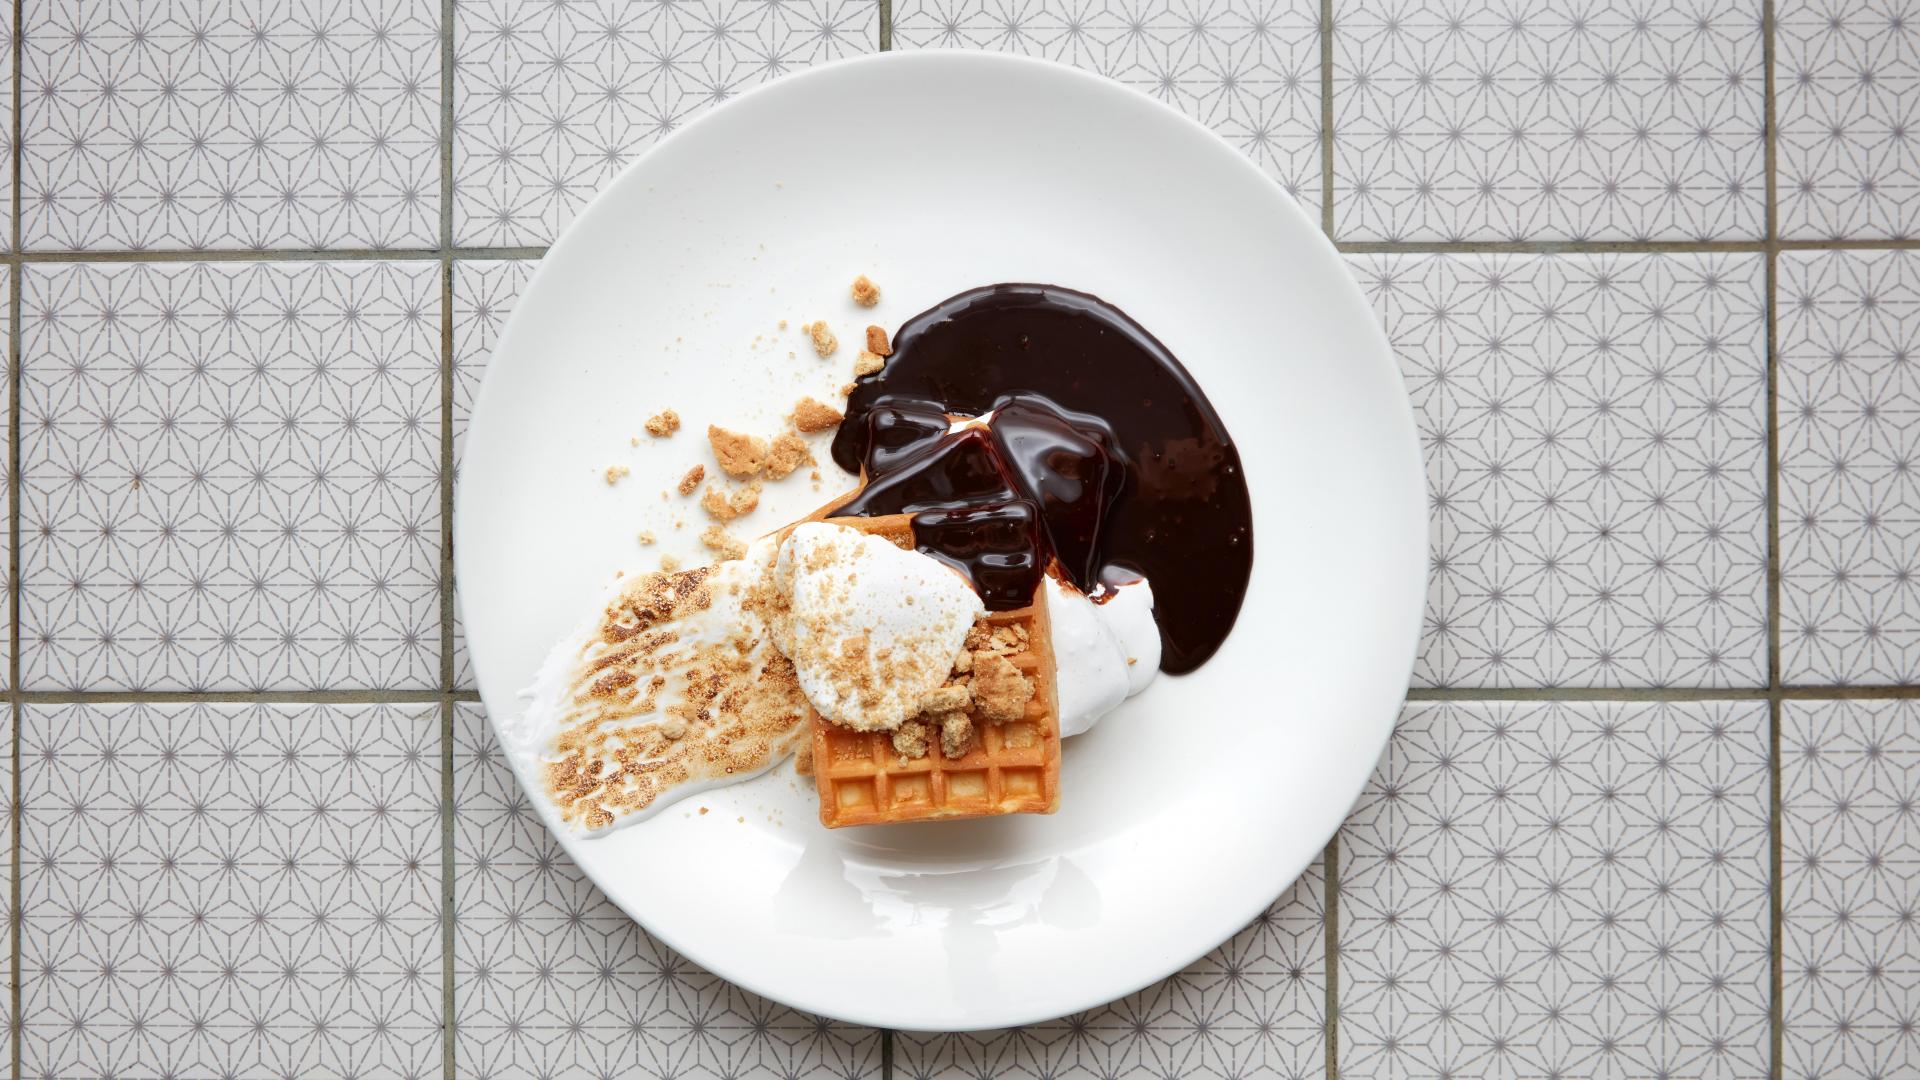 Best brunch London: West 4th's Canadian-inspired menu offers dishes like this rich S'mores and chocolate-covered waffle